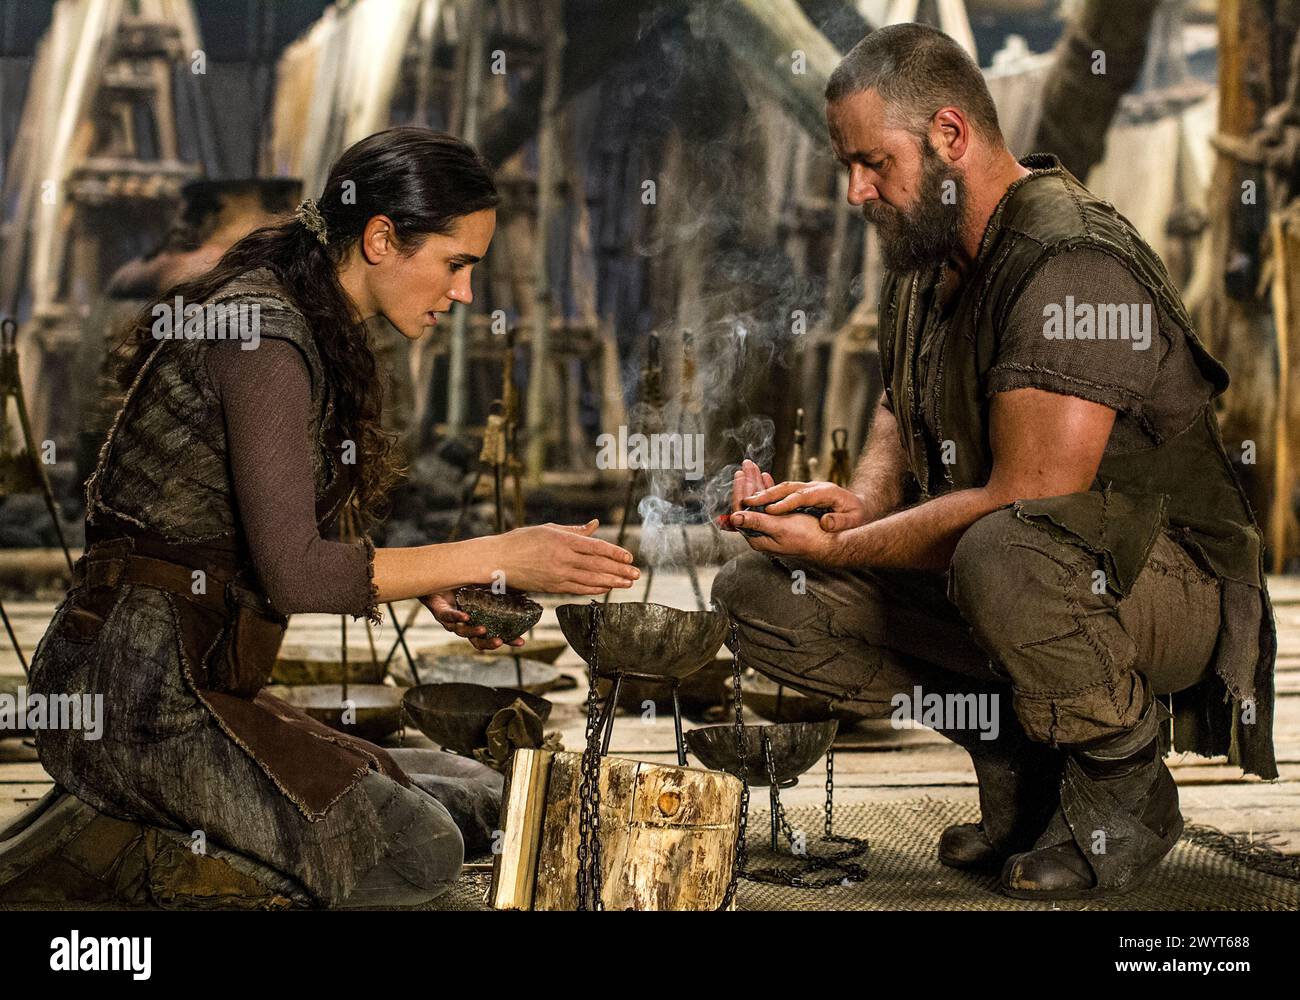 Noah (2014) directed by Darren Aronofsky and starring  Jennifer Connelly as Naameh and Russell Crowe as Noah. Noah is chosen by God to undertake a momentous mission before an apocalyptic flood cleanses the world. Publicity photograph.***EDITORIAL USE ONLY*** Credit: BFA / Niko Tavernise / Paramount Pictures Stock Photo